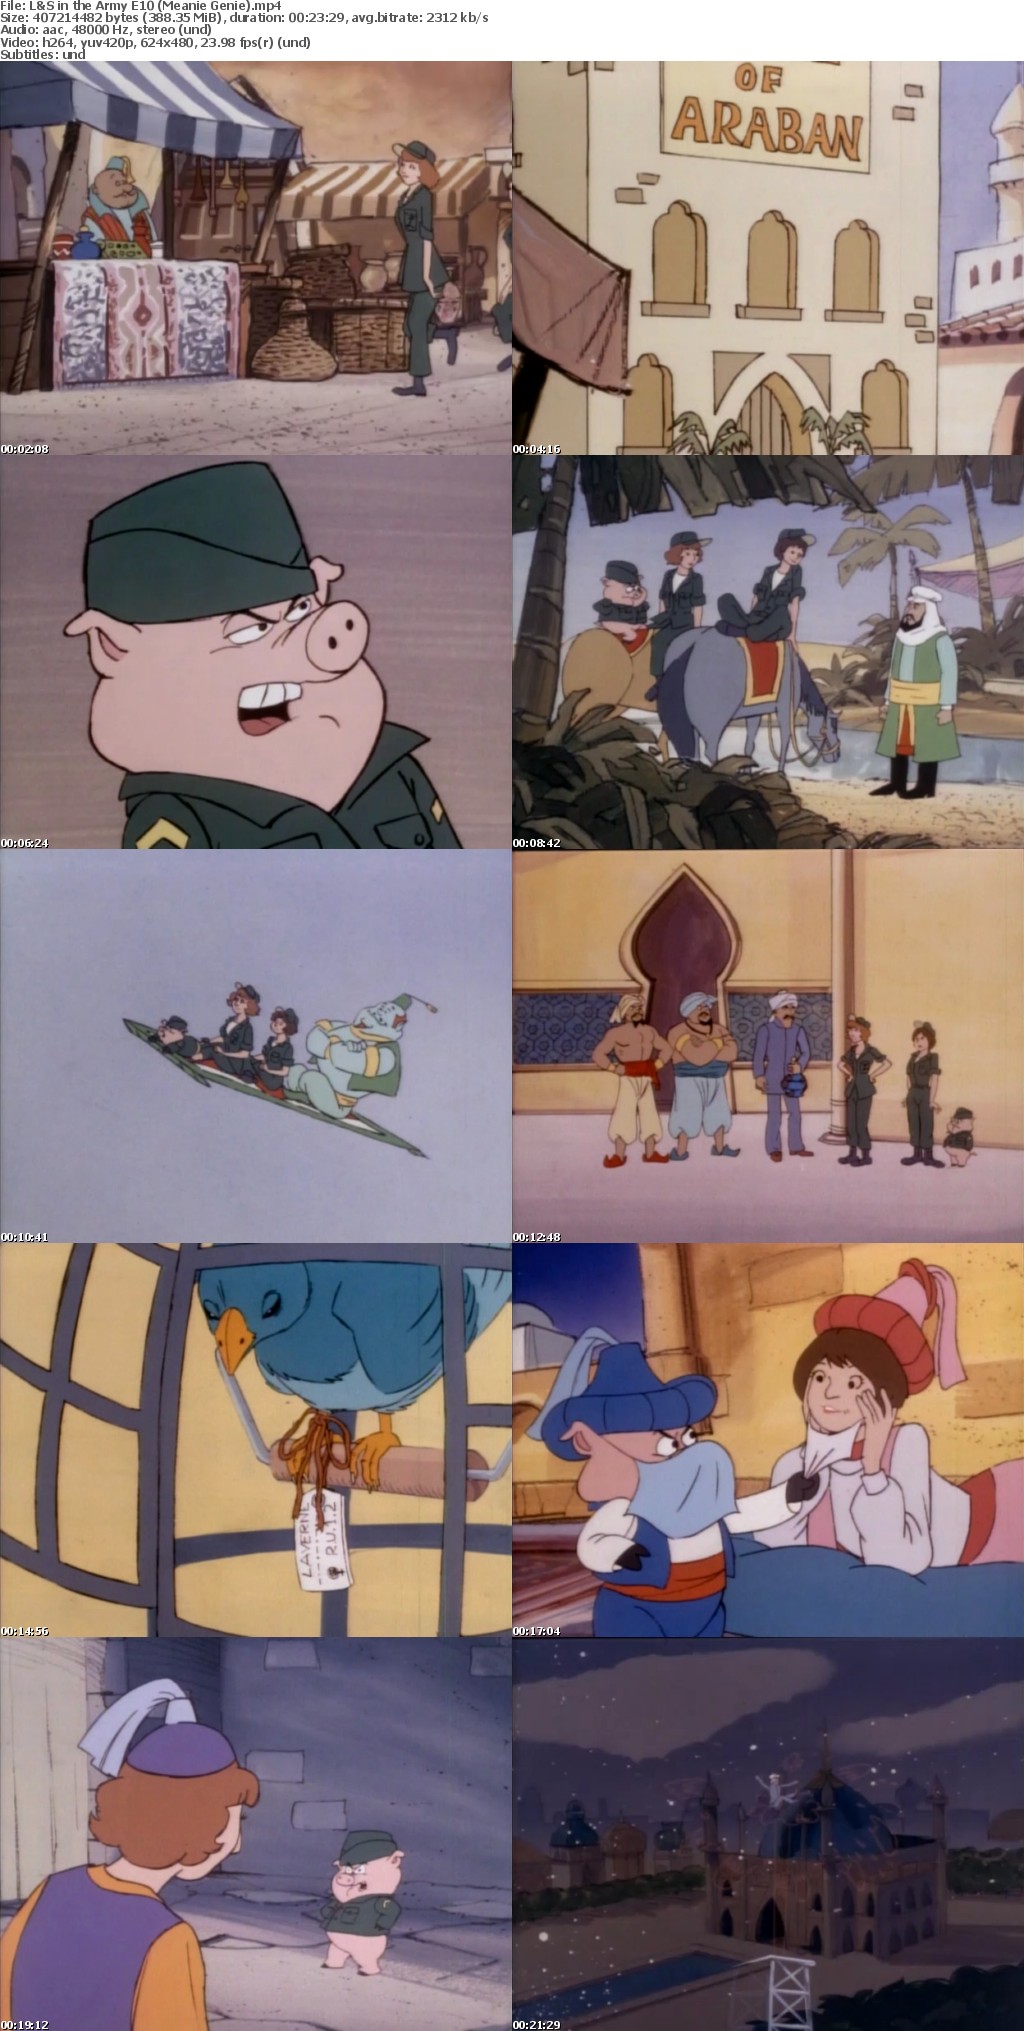 Laverne and Shirley in the Army (Cartoon series in MP4 format)